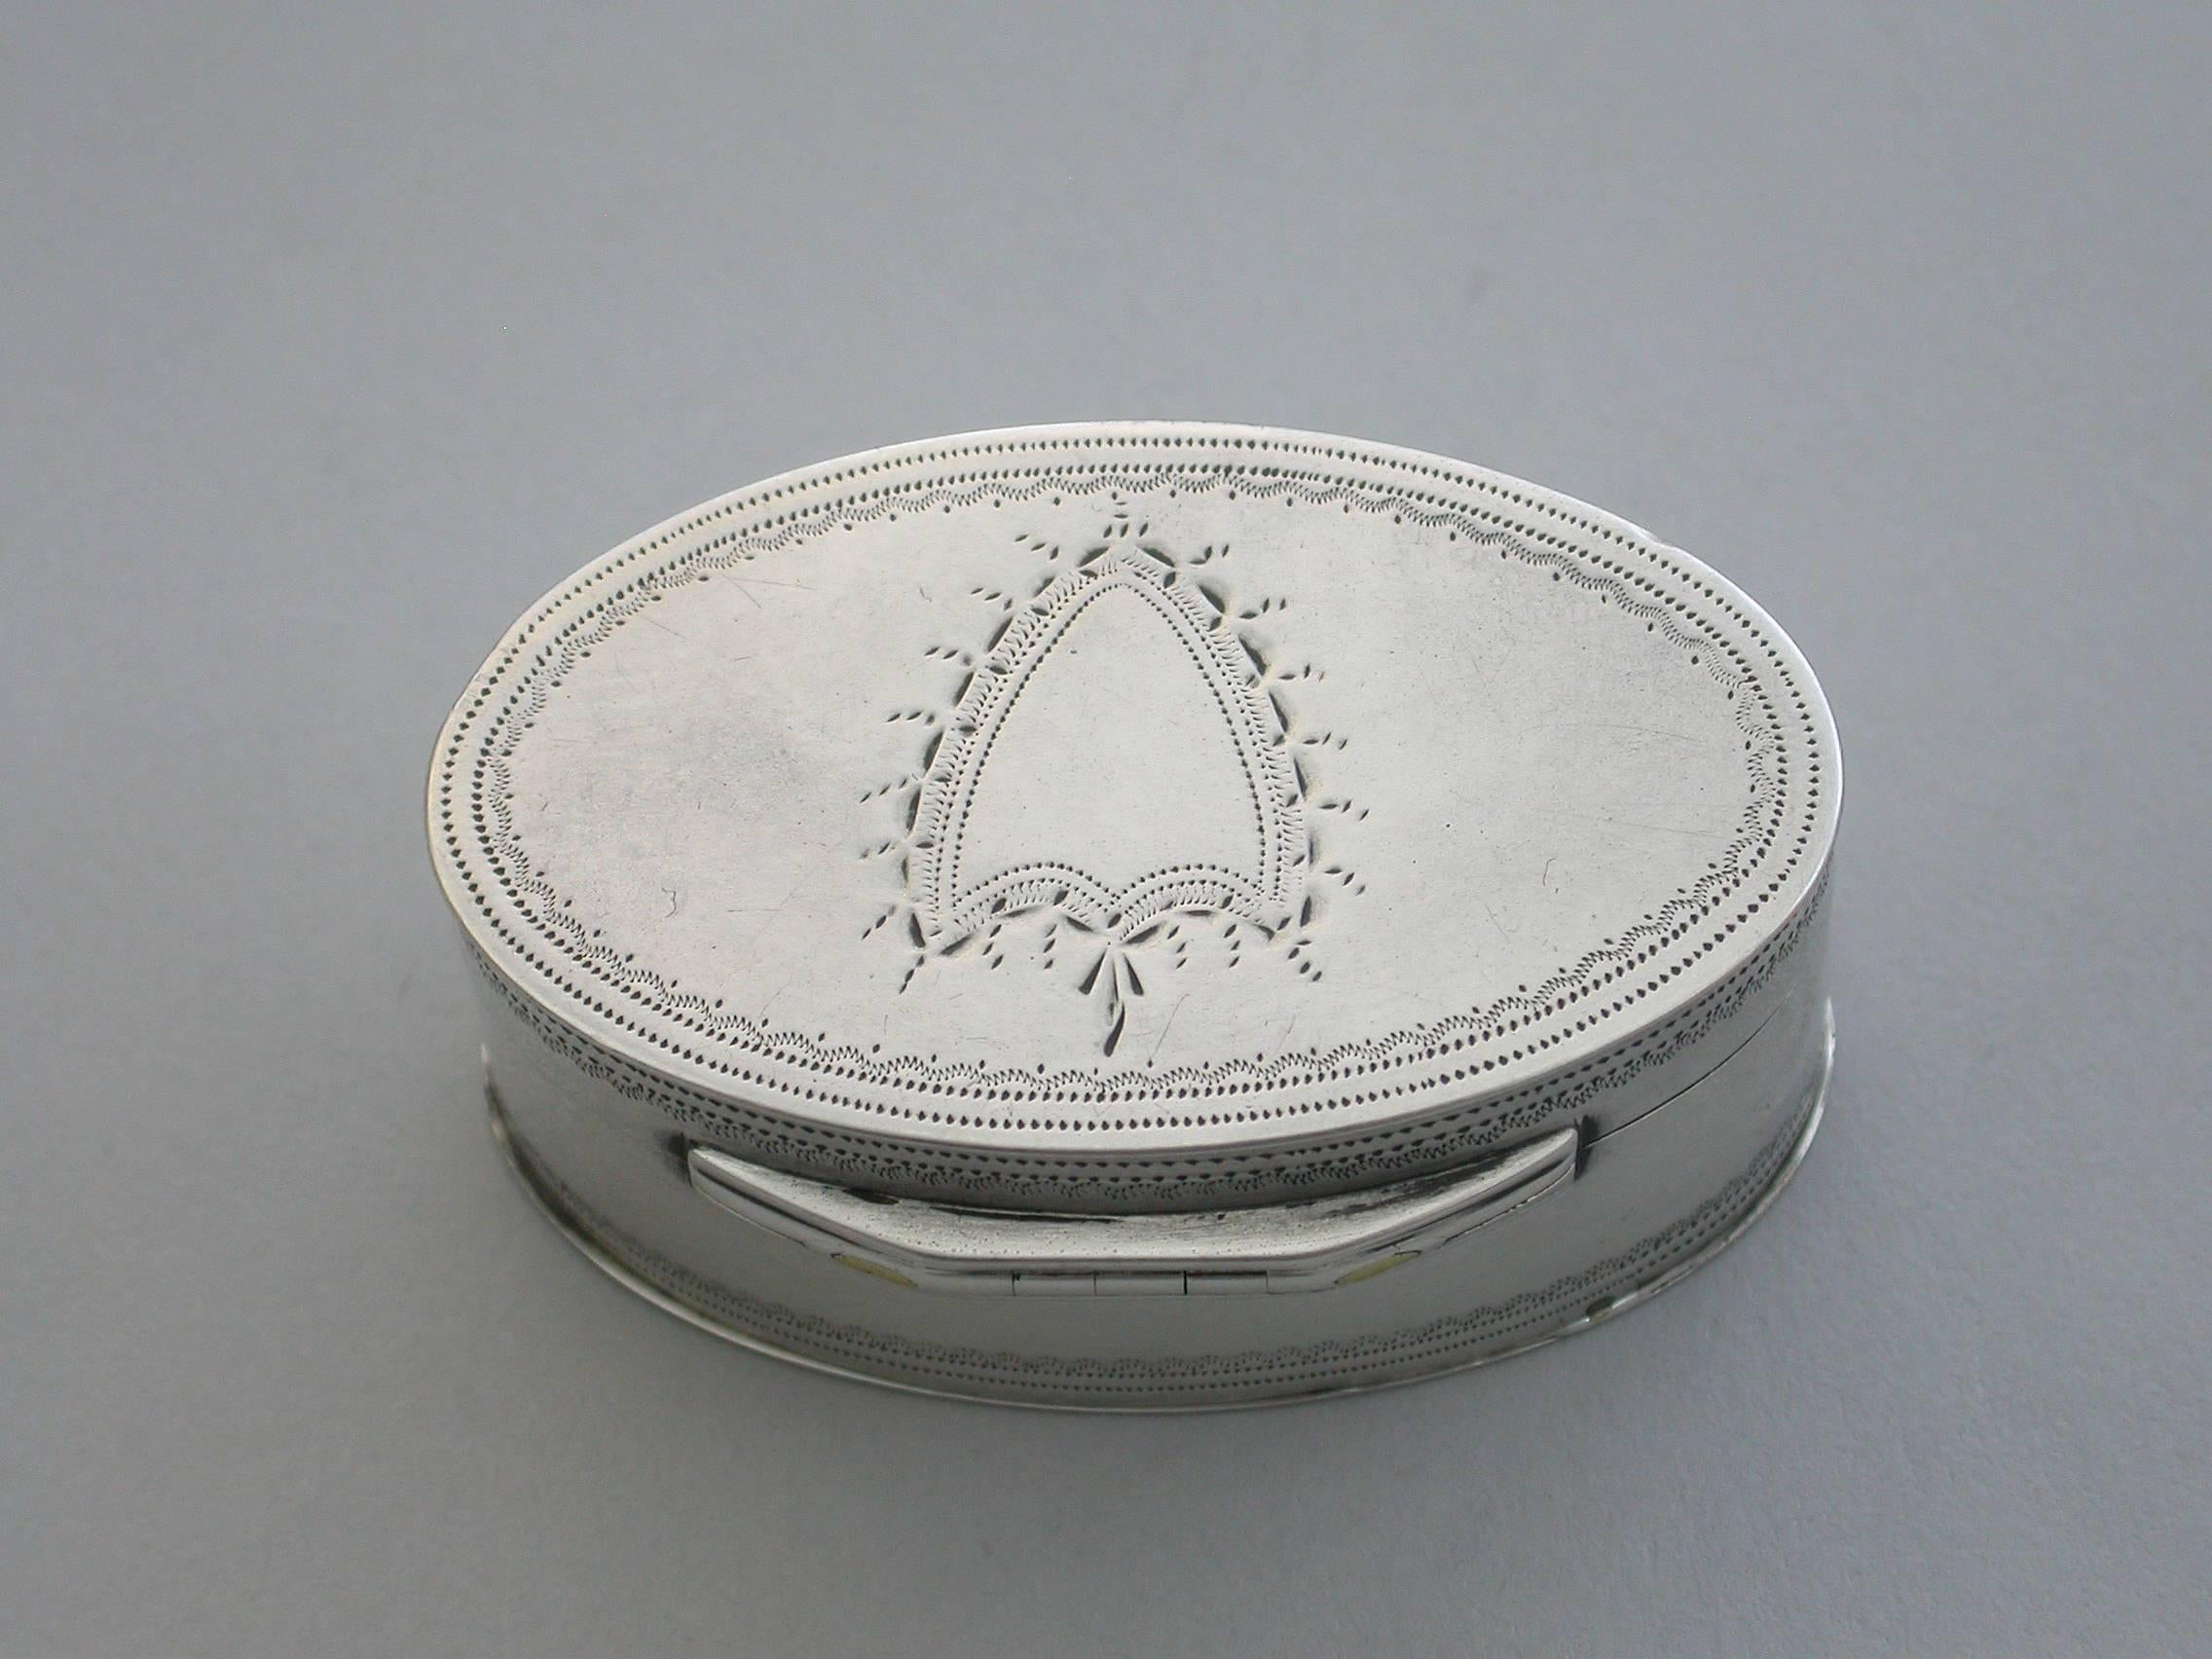 A good quality George III silver Nutmeg Grater of navette shape with bright-cut engraved decoration including vacant cartouches to the lid and base.

Made in Birmingham, 1794 (no markers mark).

In good condition with no damage or